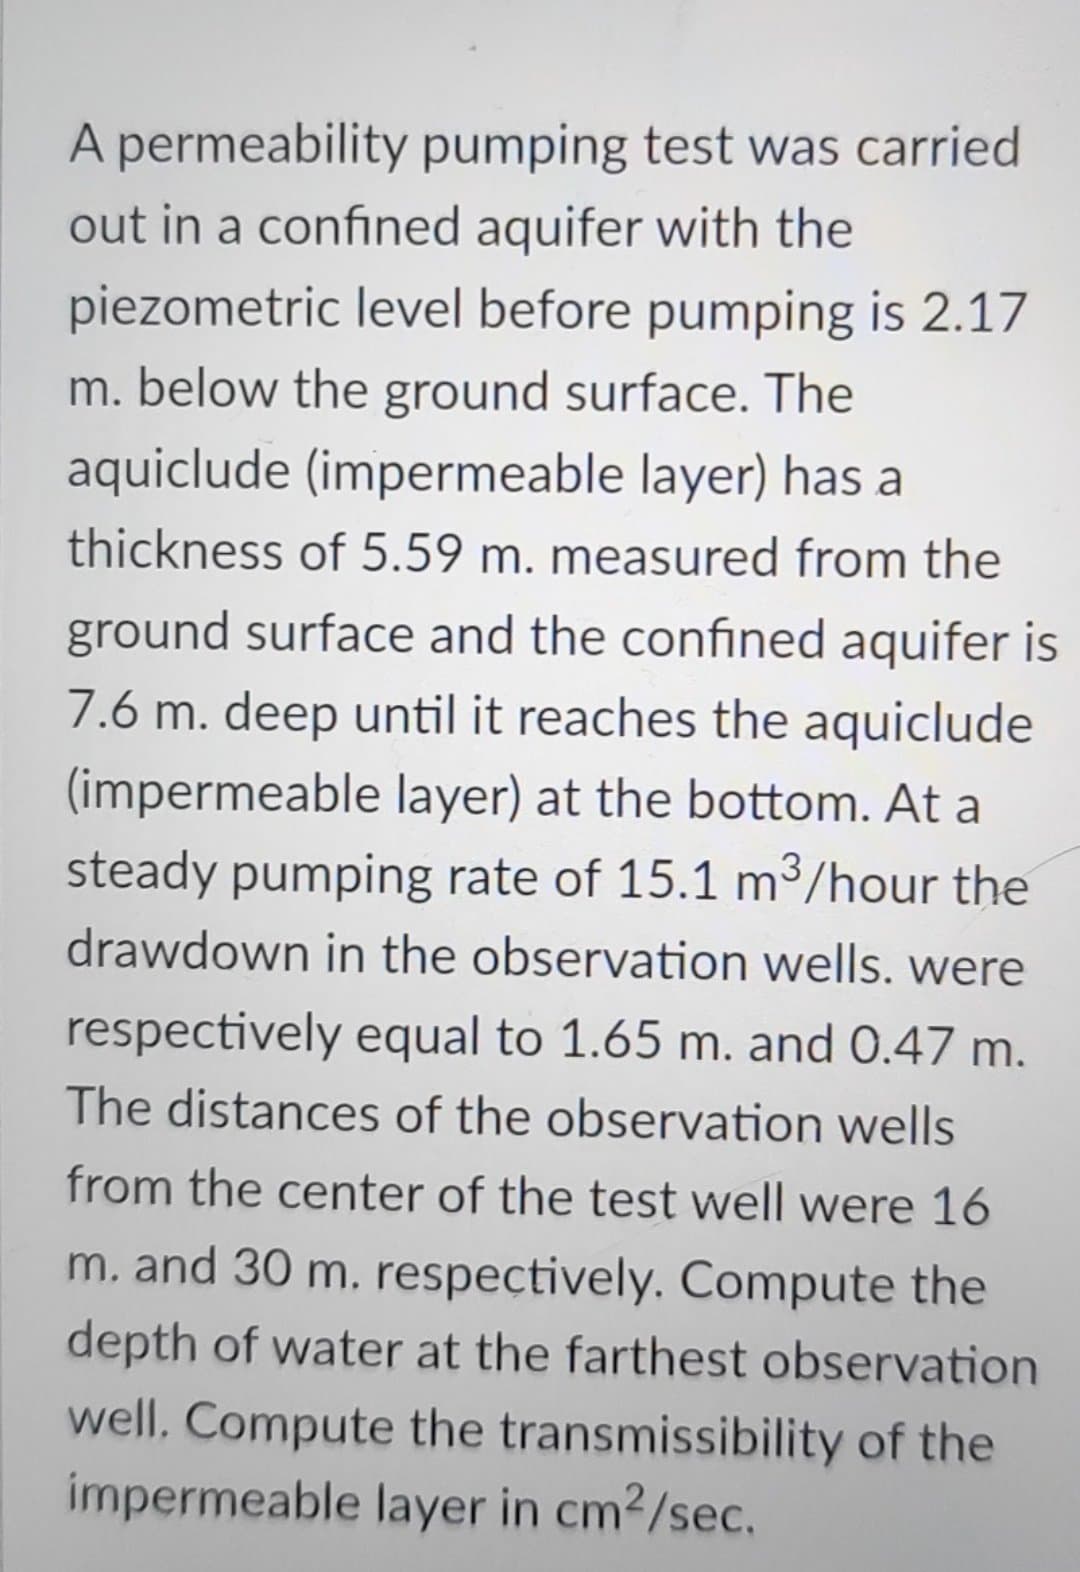 A permeability pumping test was carried
out in a confined aquifer with the
piezometric level before pumping is 2.17
m. below the ground surface. The
aquiclude (impermeable layer) has a
thickness of 5.59 m. measured from the
ground surface and the confined aquifer is
7.6 m. deep until it reaches the aquiclude
(impermeable layer) at the bottom. At a
steady pumping rate of 15.1 m³/hour the
drawdown in the observation wells. were
respectively equal to 1.65 m. and 0.47 m.
The distances of the observation wells
from the center of the test well were 16
m. and 30 m. respectively. Compute the
depth of water at the farthest observation
well. Compute the transmissibility of the
impermeable layer in cm²/sec.